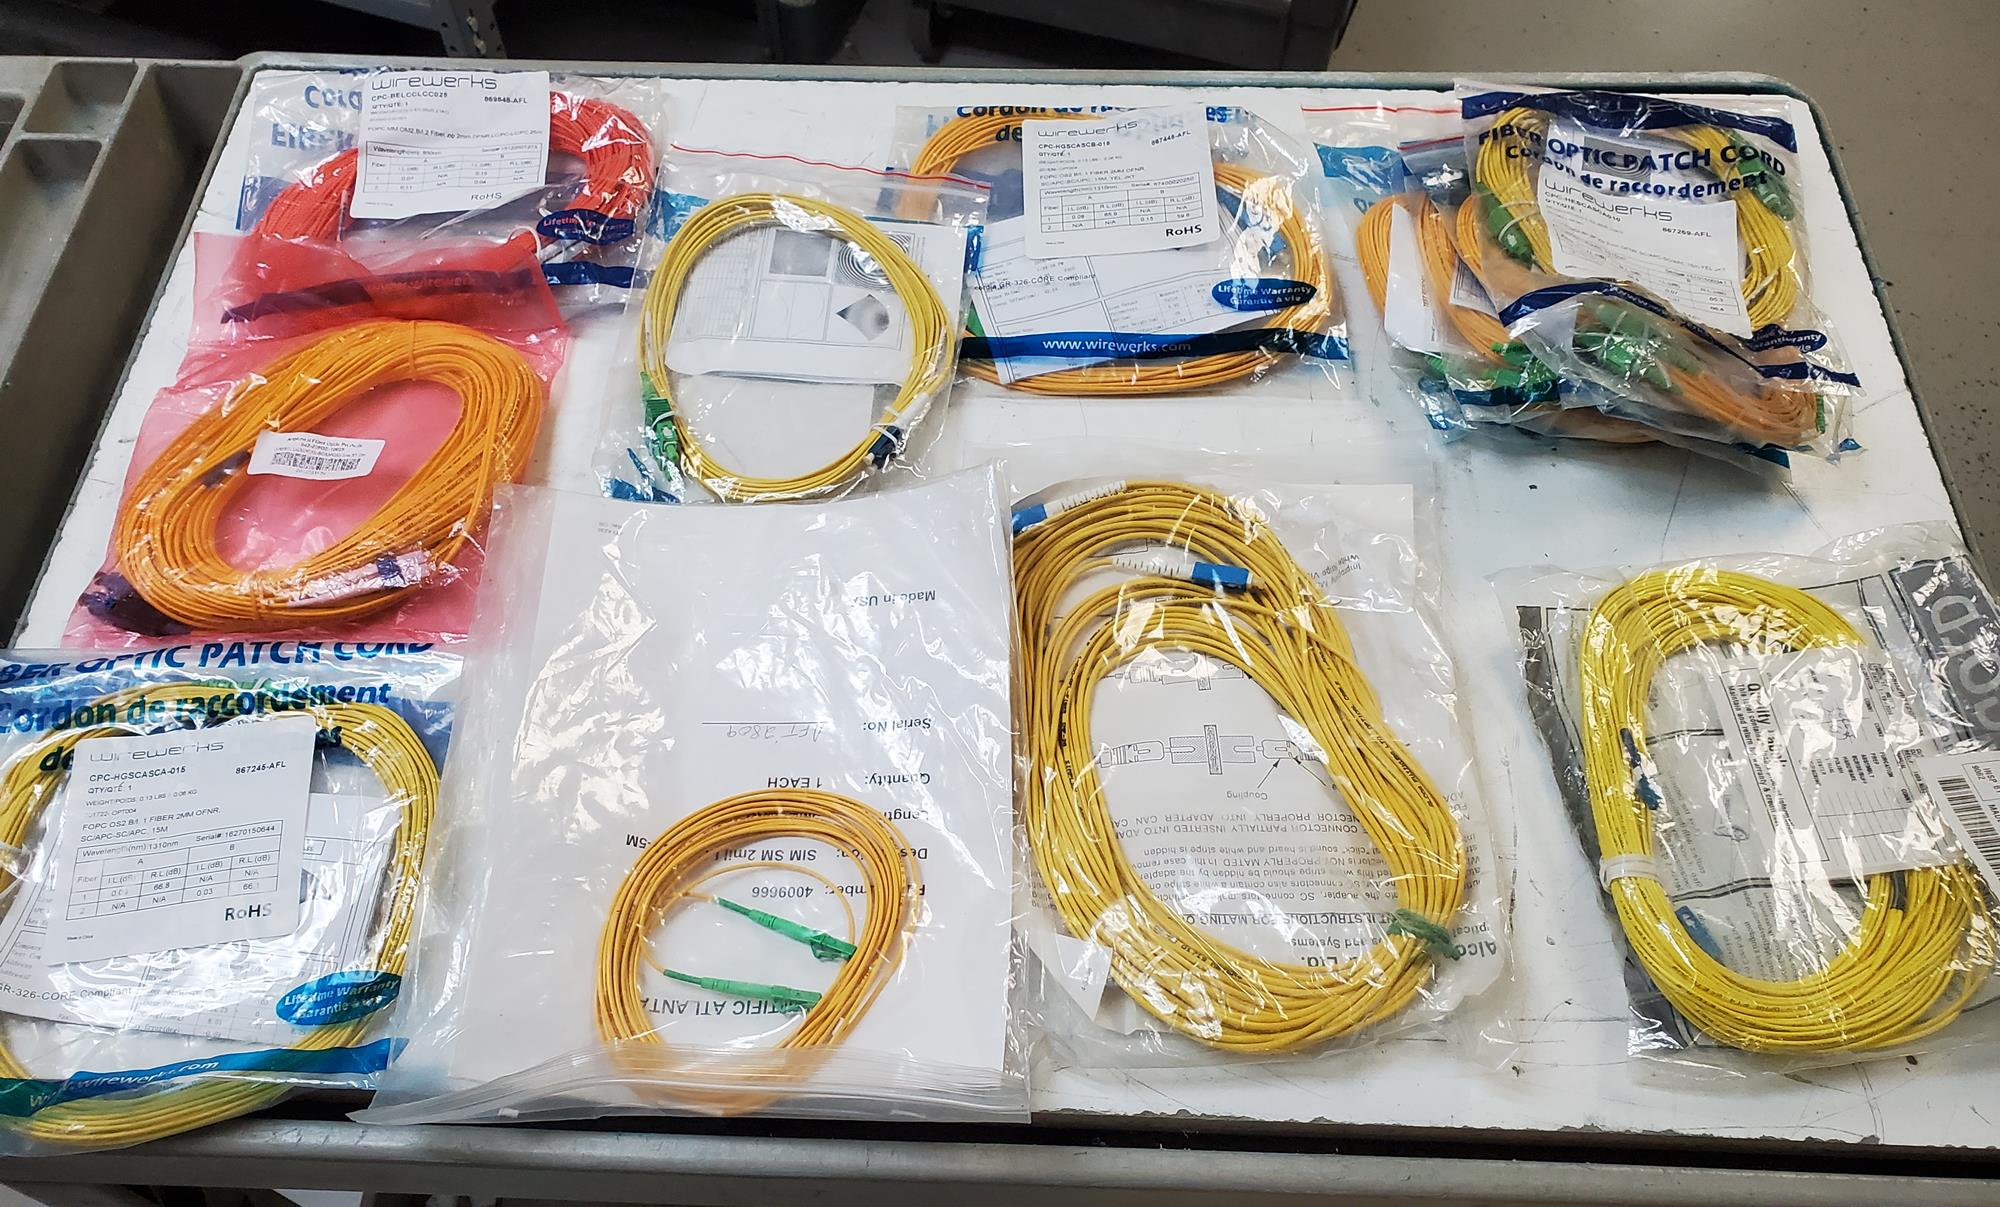 Similar product is AccuSource patchcord mixed lot